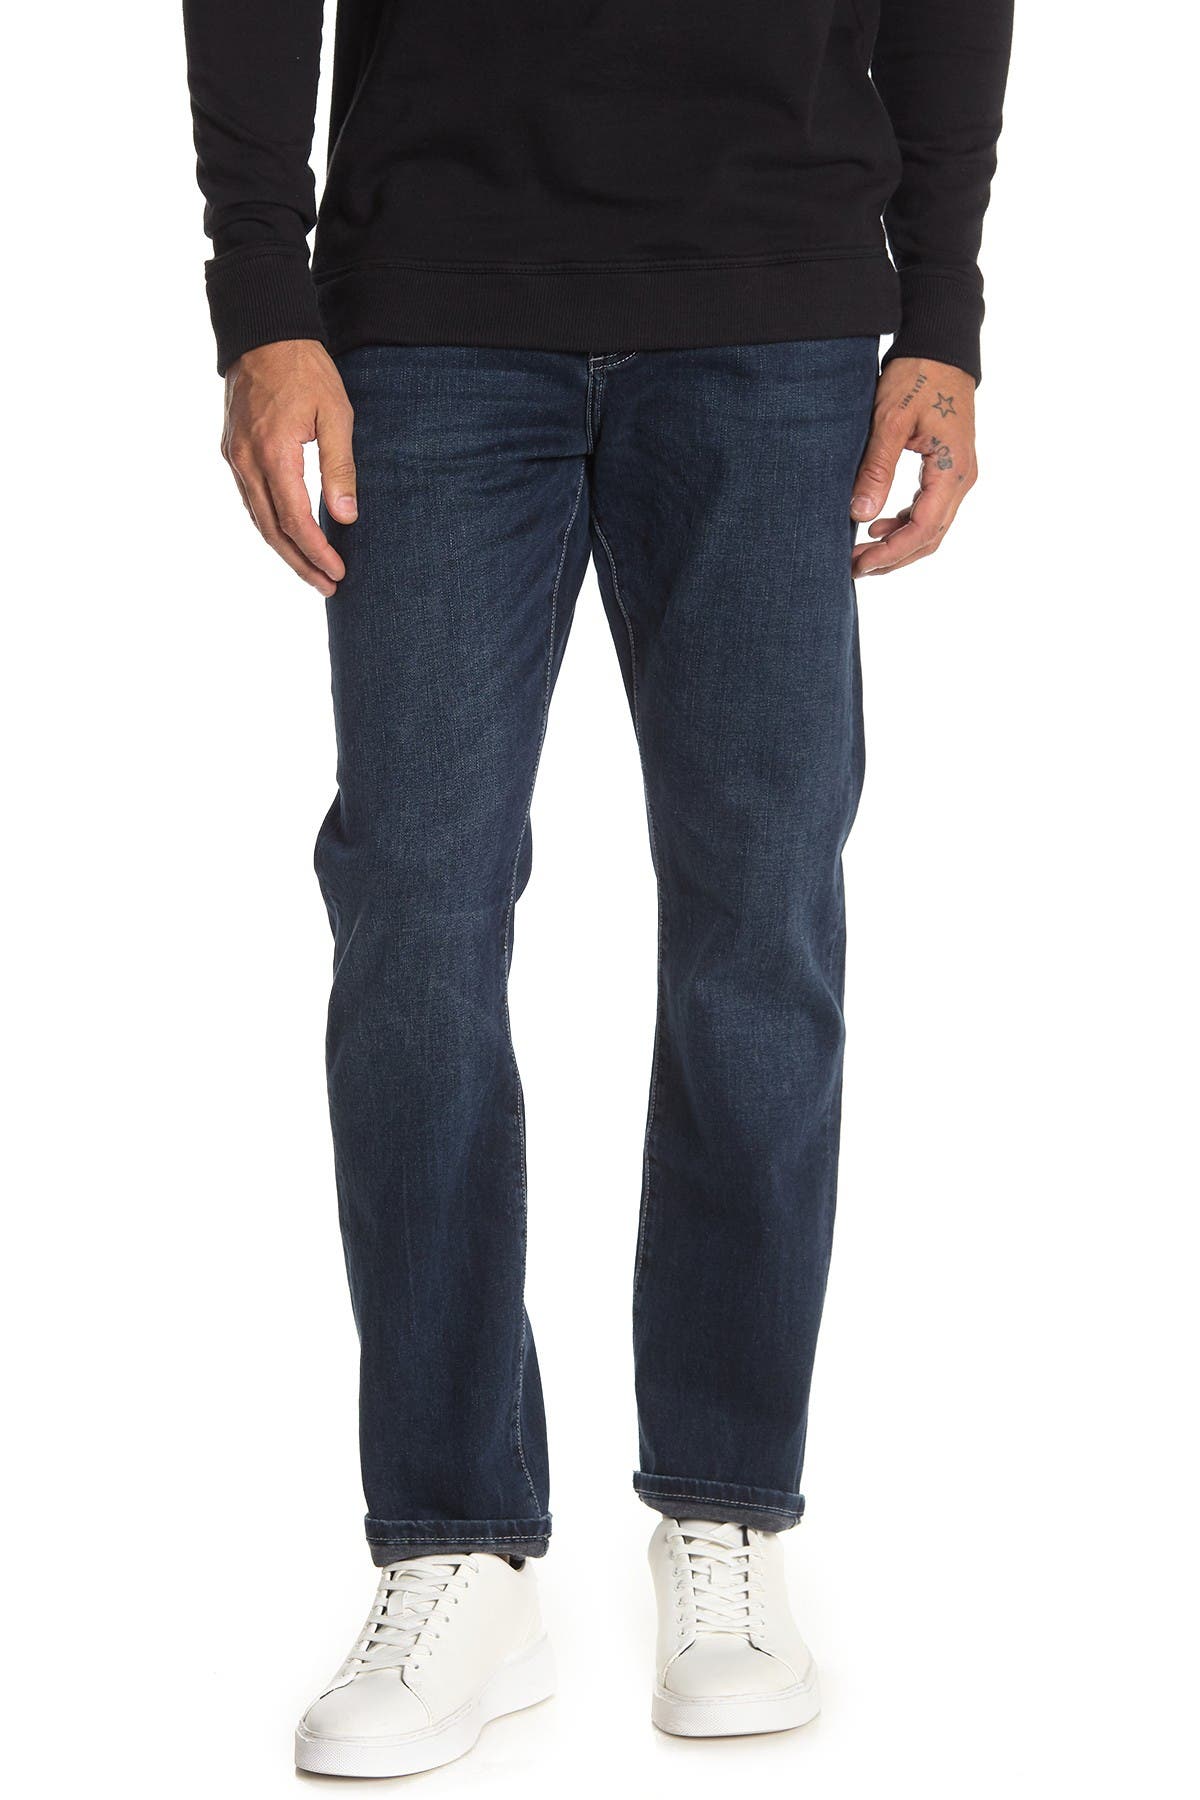 dl1961 russell classic straight jeans